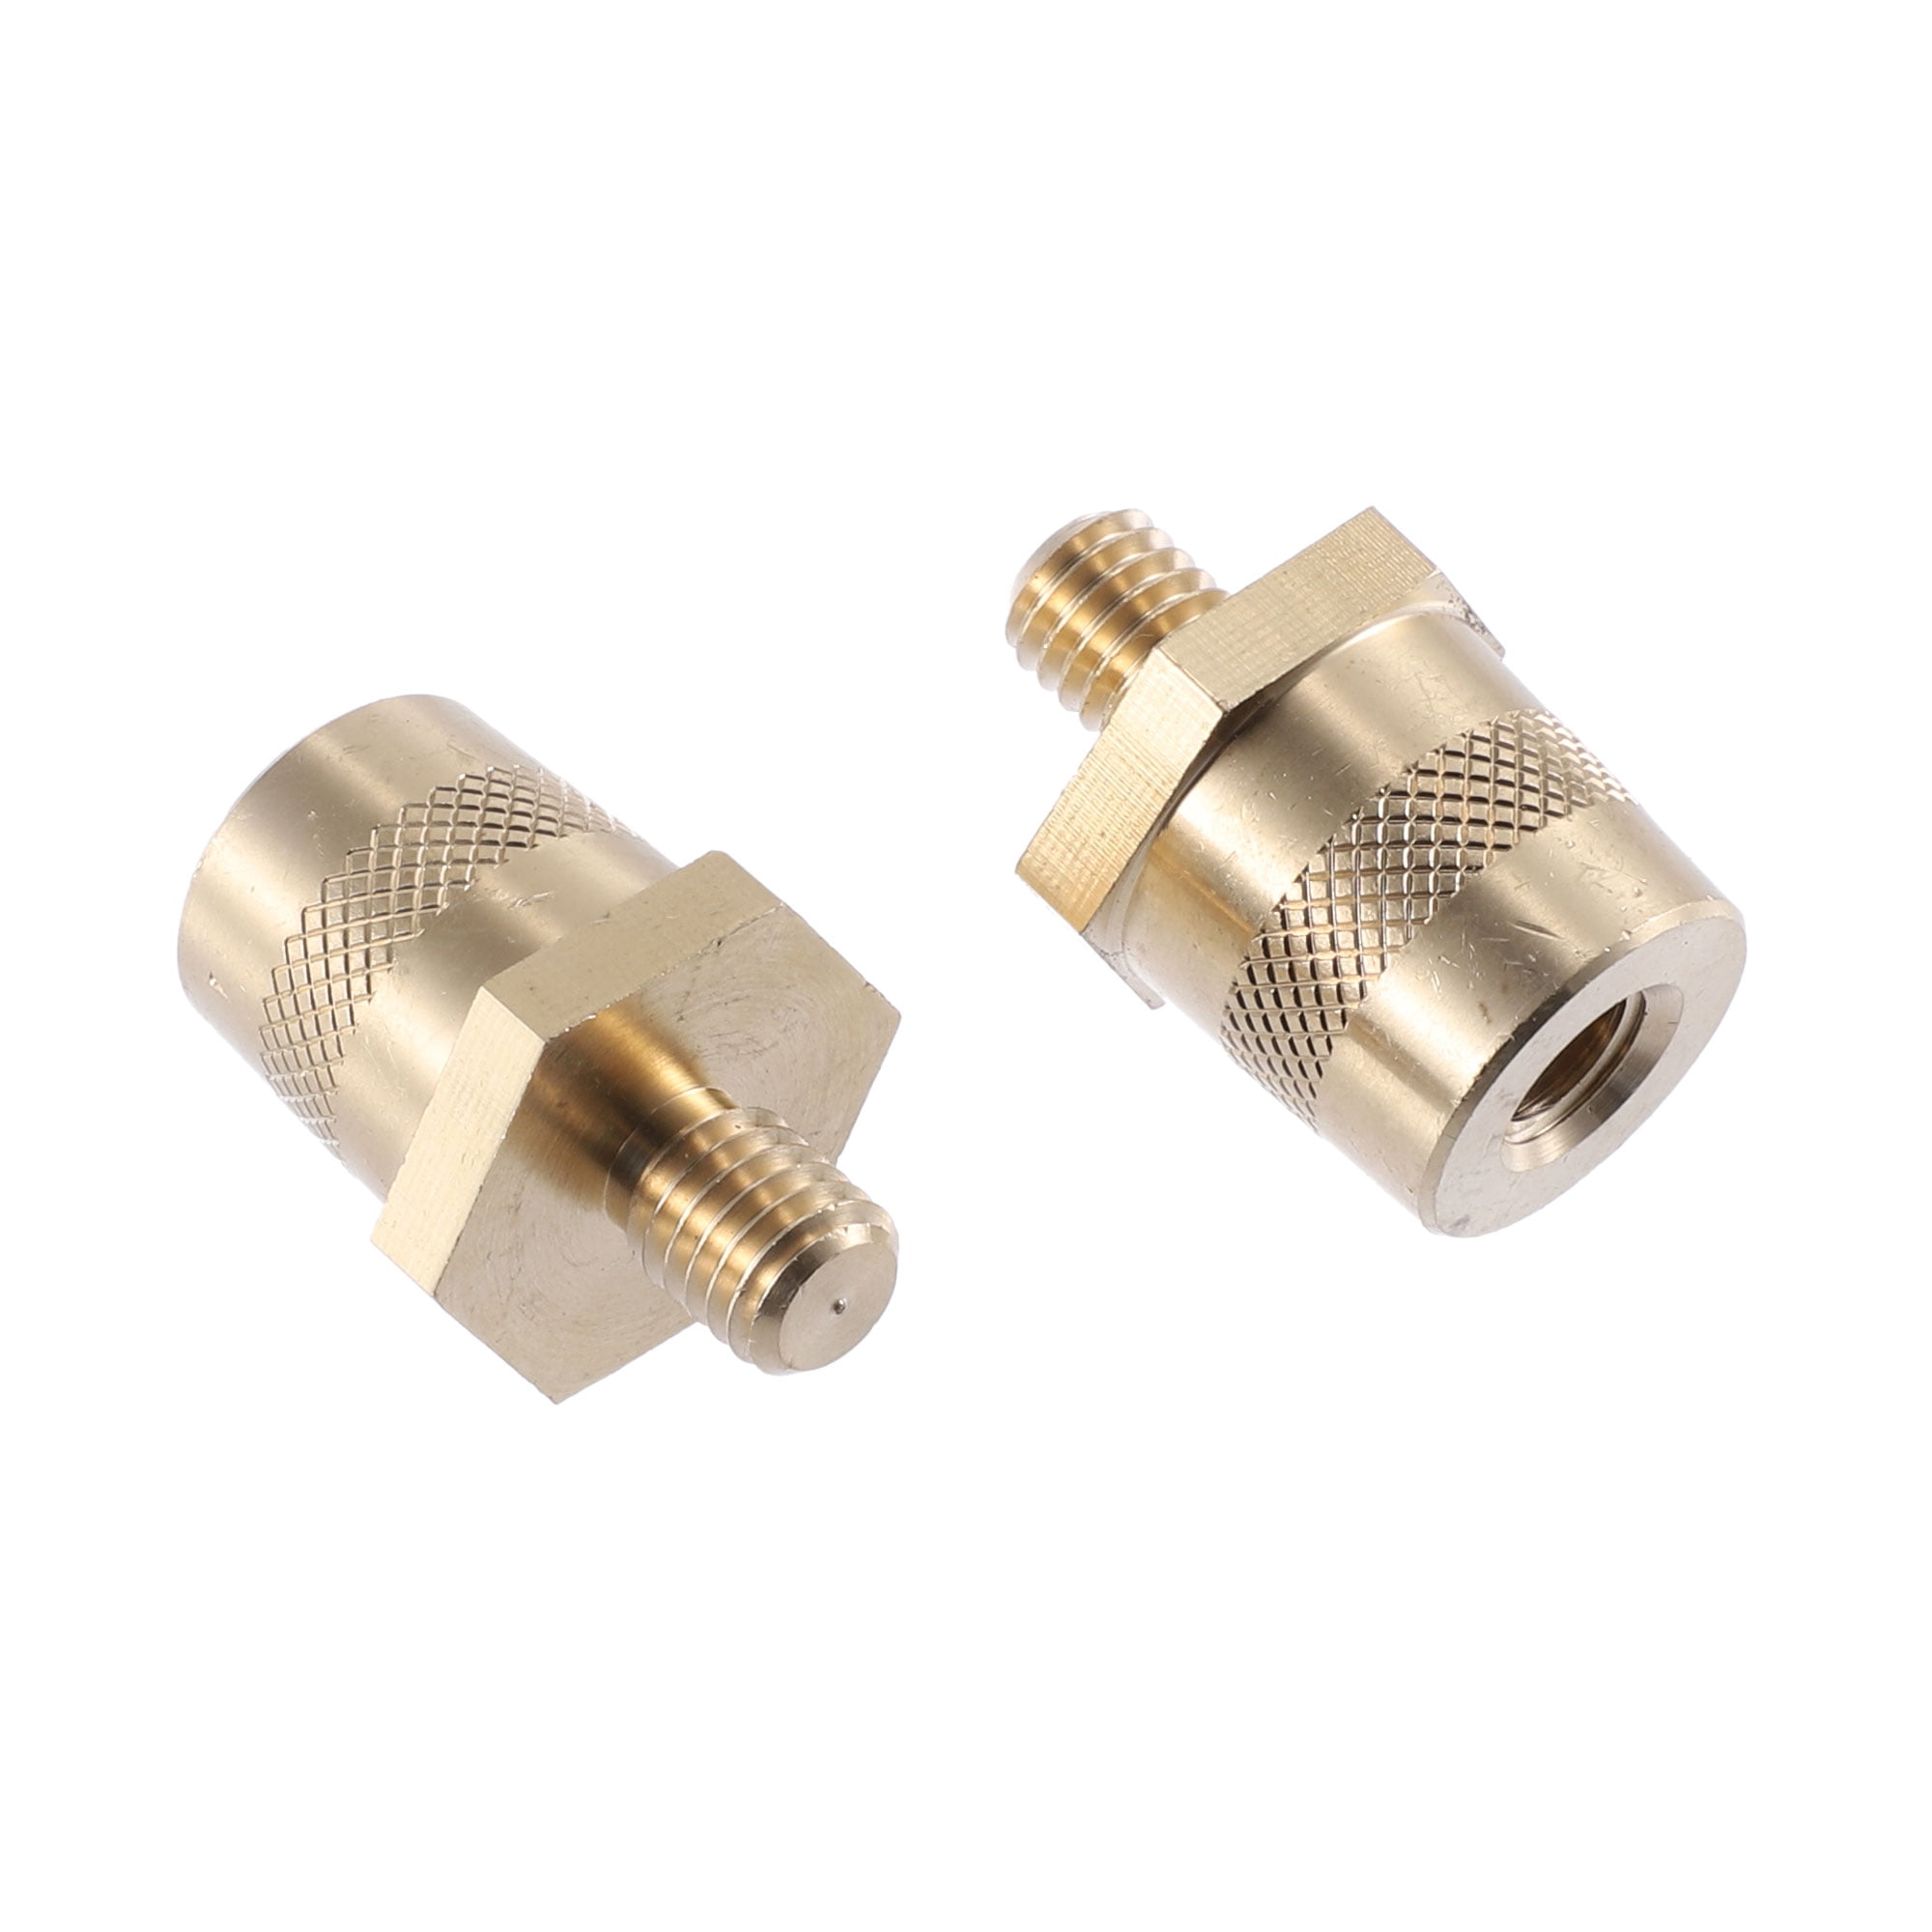 Brass Battery Pole Adapter Pair, M8 Battery Pole Adapter Pair Battery Pole  Adapter for Car Lithium Batteries with Stainless Steel Screws, Washers